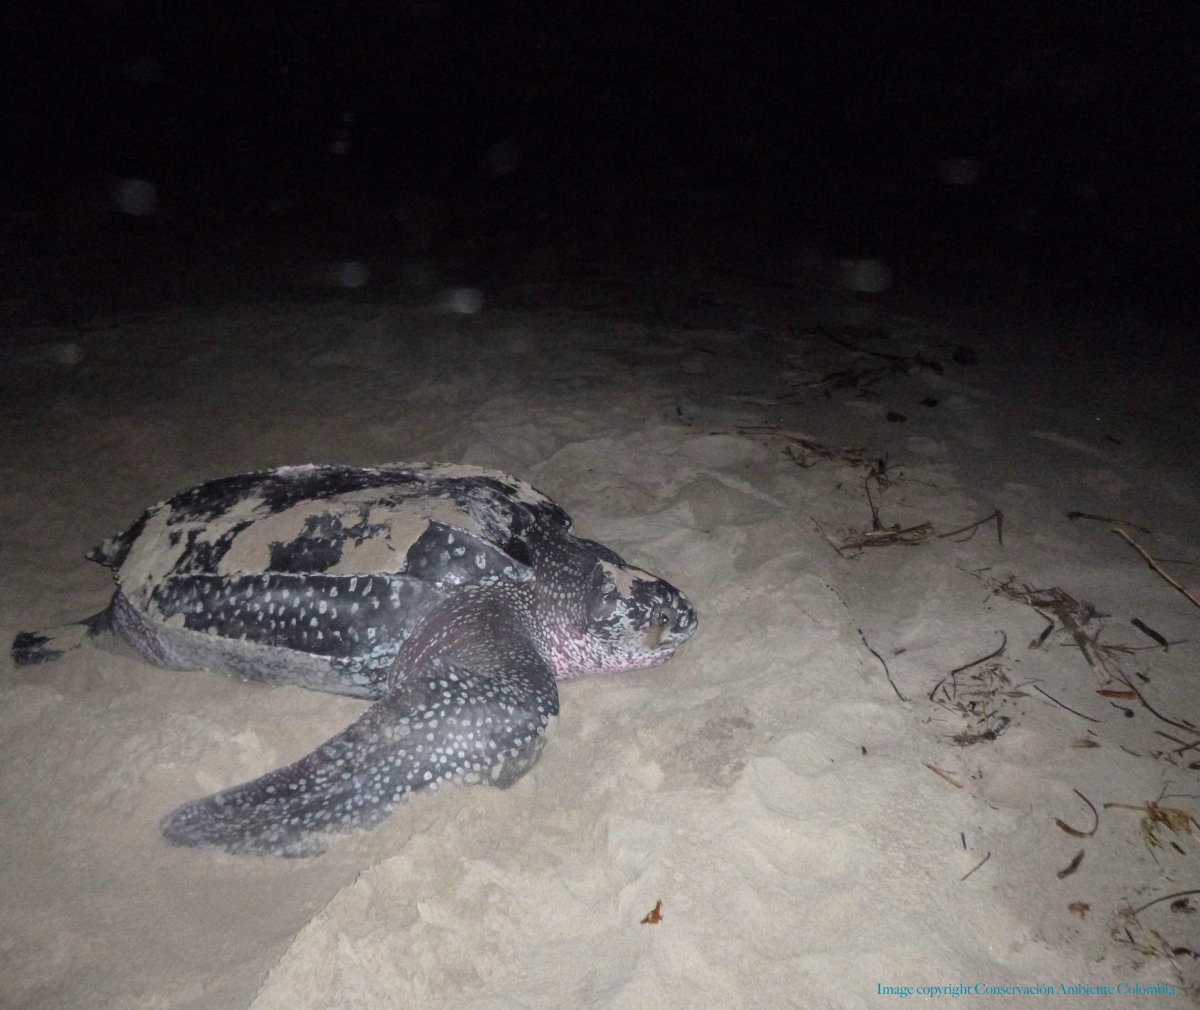 A sea turtle whose travels deepened scientists' understanding of leatherback biology has died, say federal fisheries officials. Red Rockette, who was first tagged in Nova Scotia in 2012, lies in a nesting site following removal of a satellite transmitter, in Colombia in an April 2013 handout photo. 